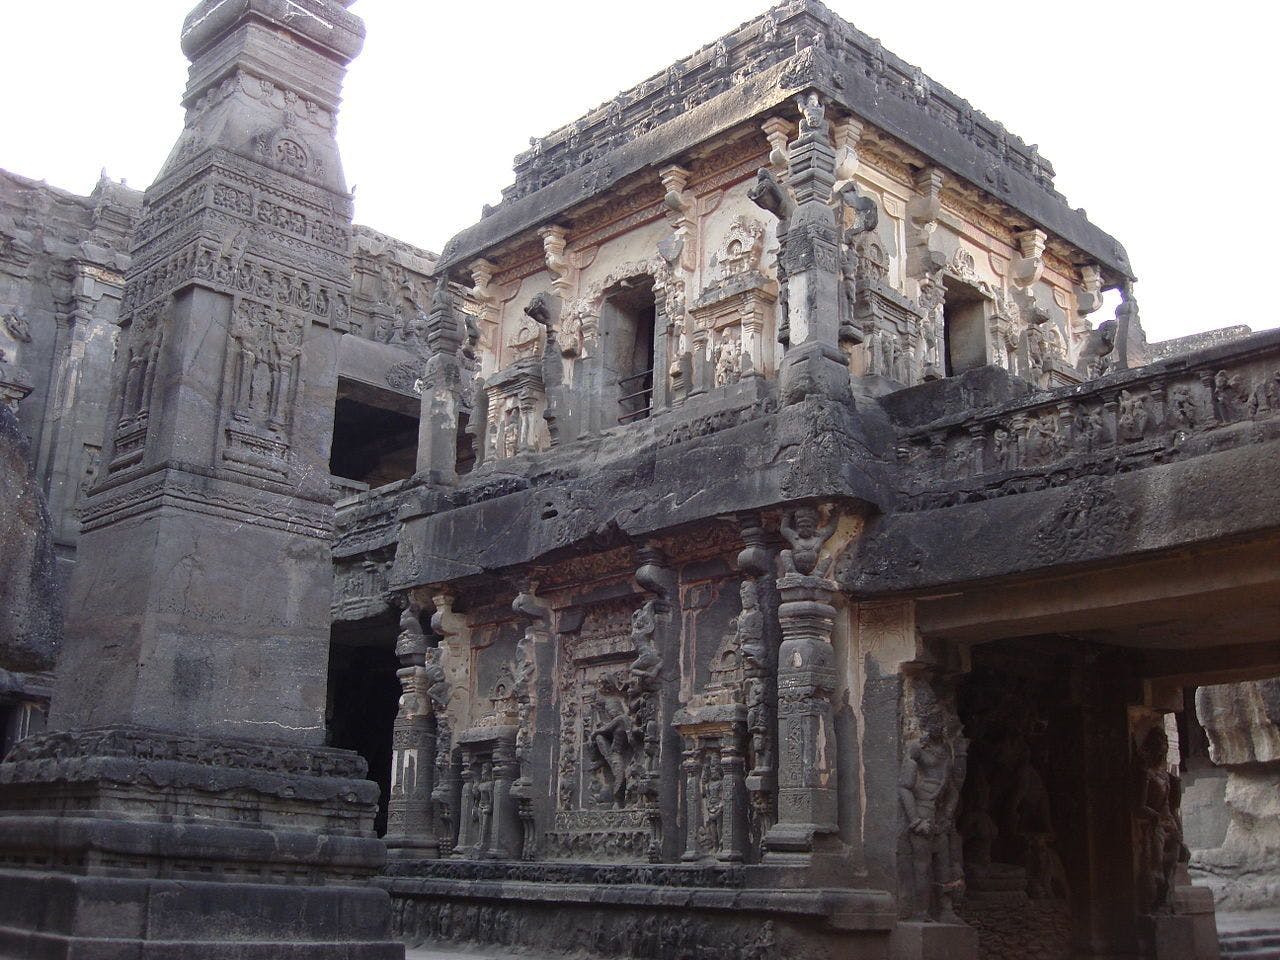 The Nandi mandapa and main Shiva temple are each about 7 metres high, and built on two storeys